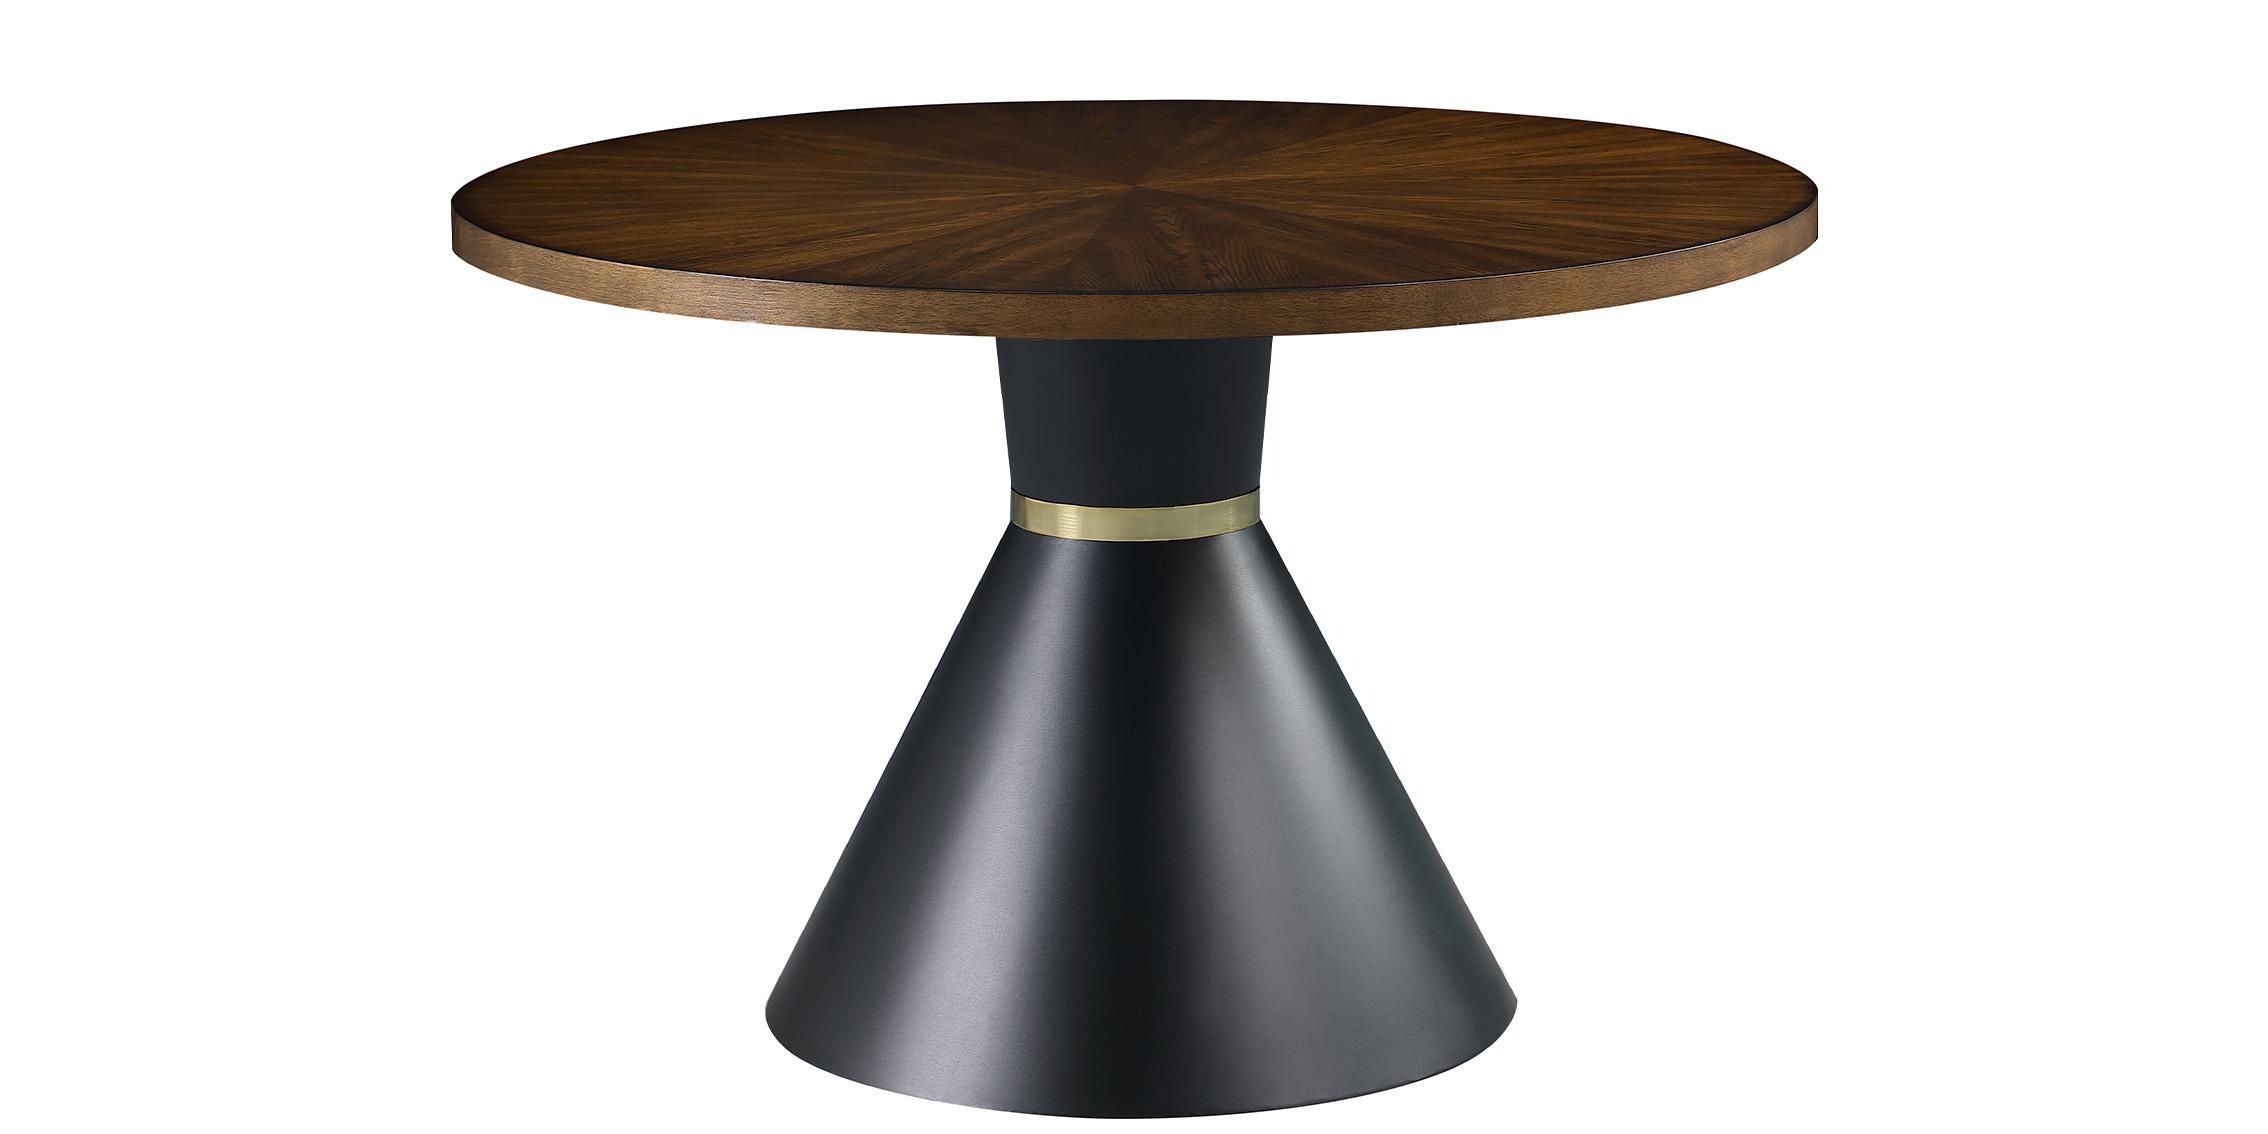 Contemporary, Modern Dining Table SHERIDAN 742-T 742-T in Brown, Black 